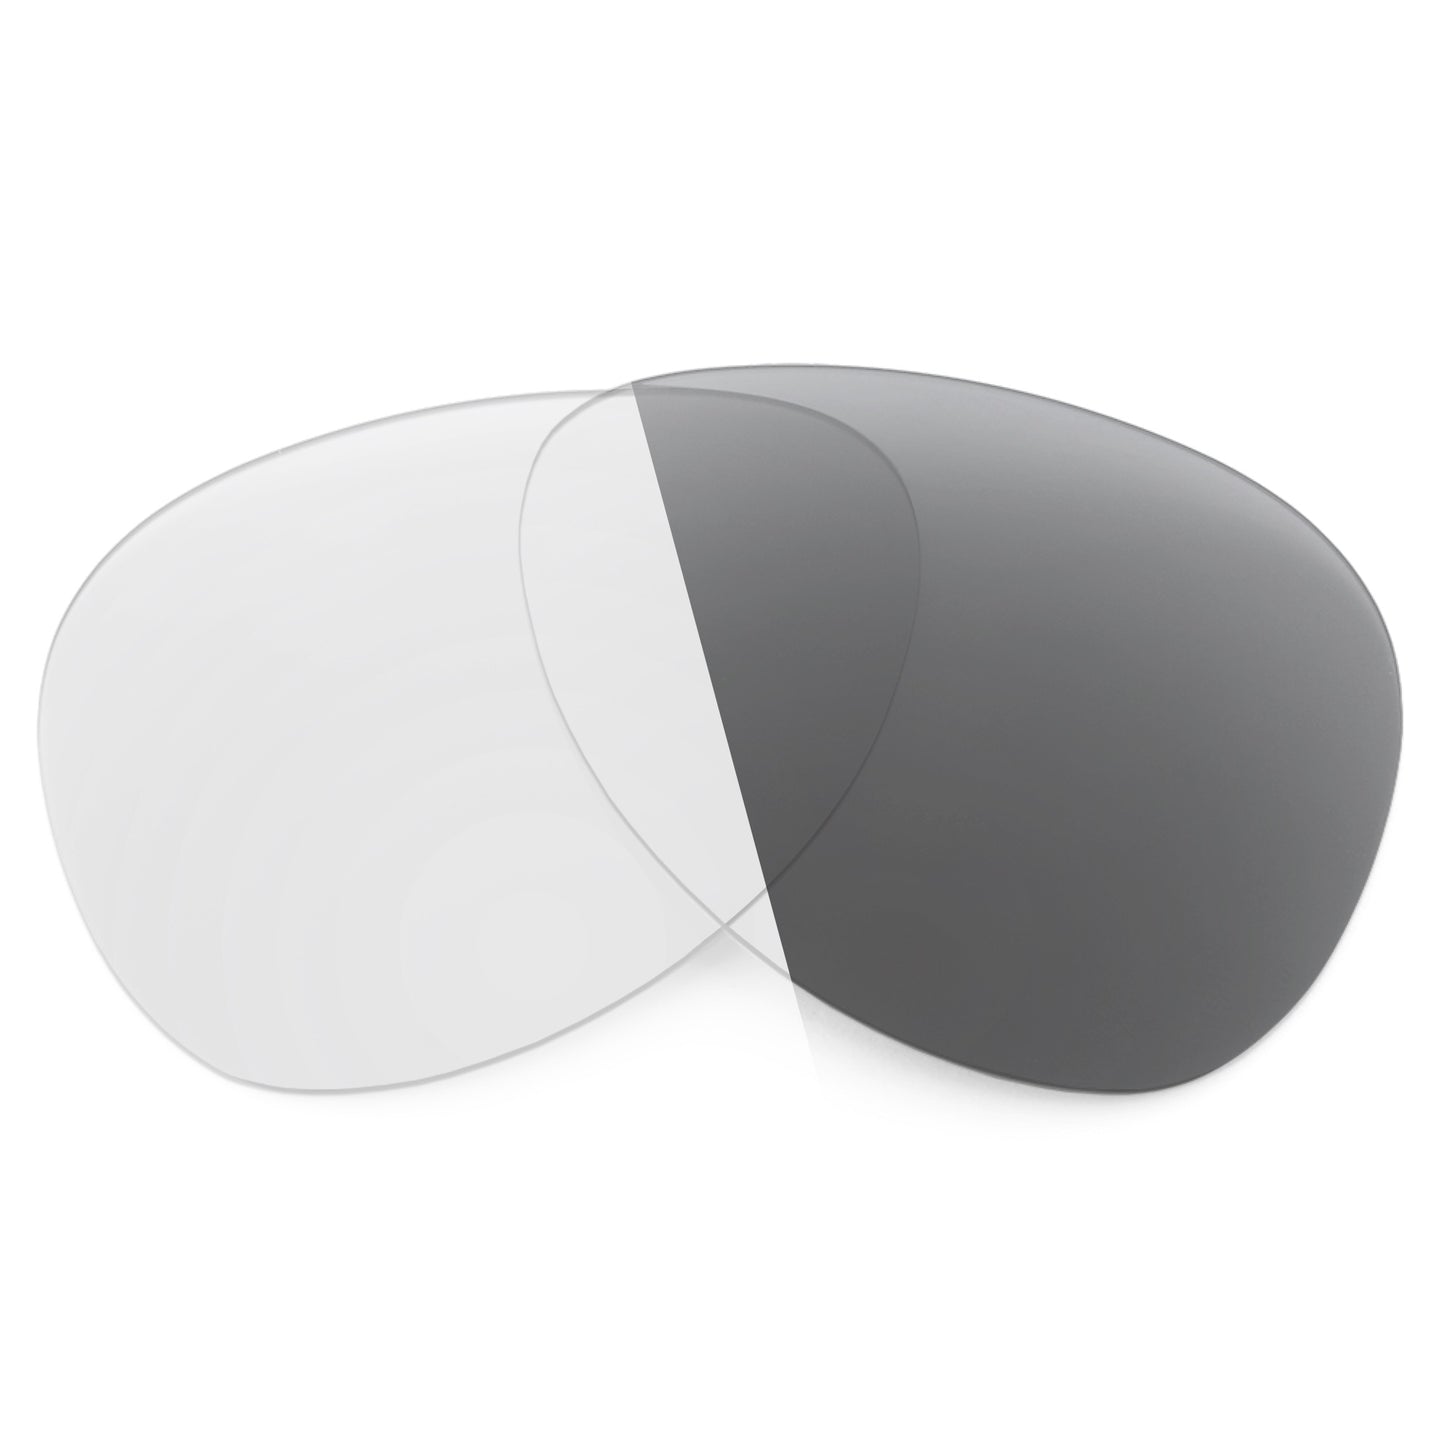 Revant replacement lenses for Ray-Ban Aviator Liteforce RB4180 58mm Non-Polarized Adapt Gray Photochromic